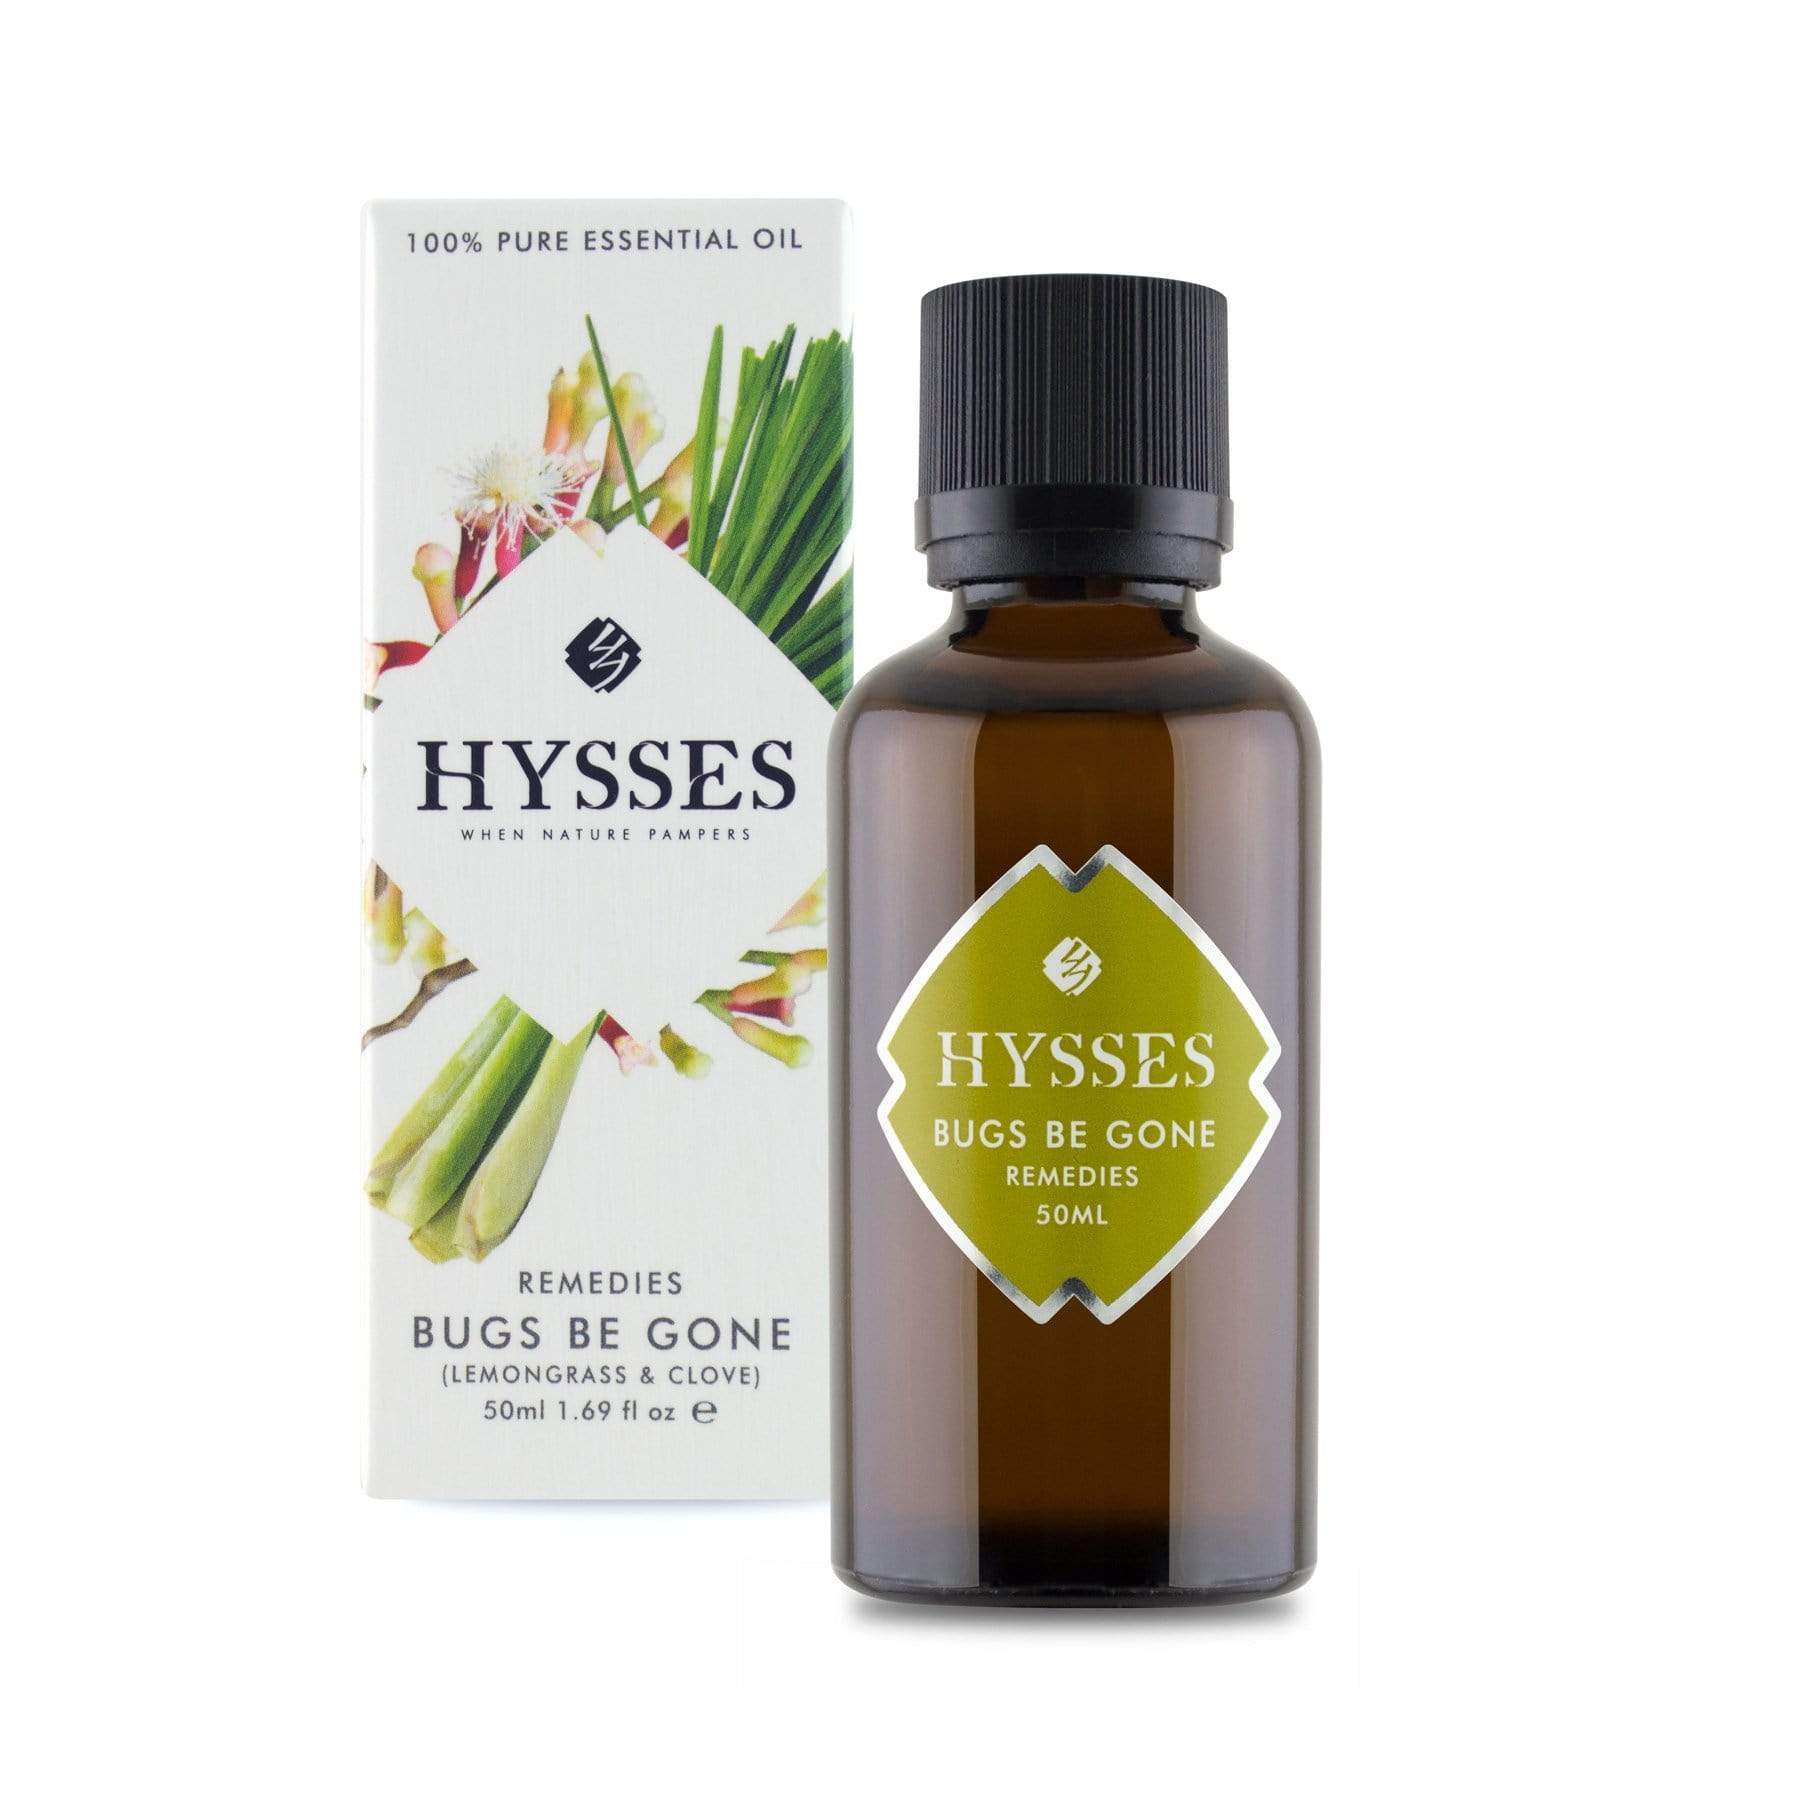 Hysses Essential Oil 50ml Remedies Bugs Be Gone, 10ml